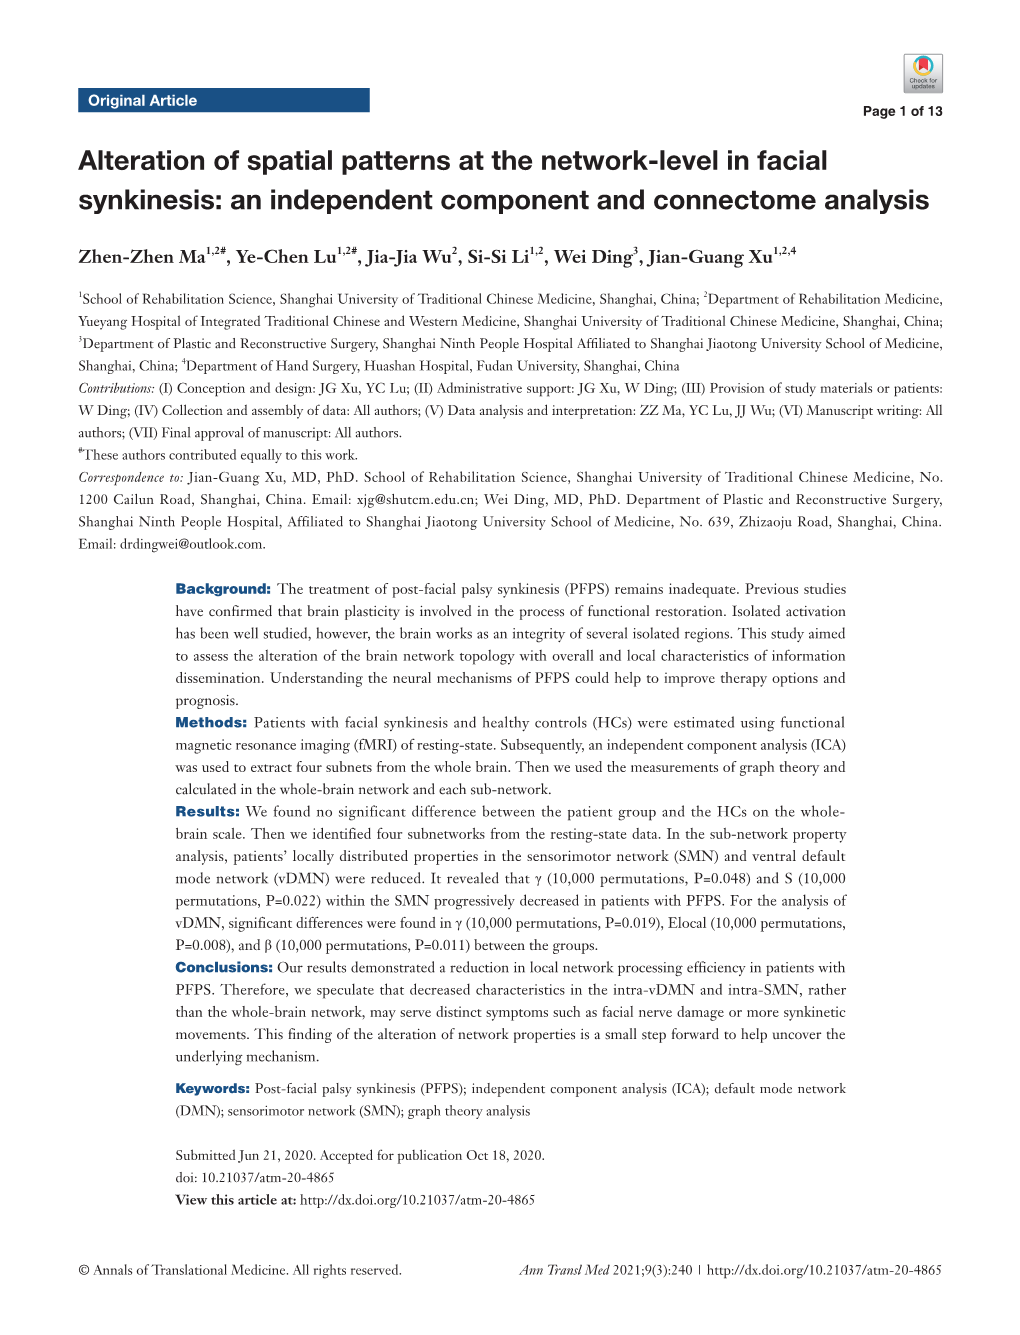 Alteration of Spatial Patterns at the Network-Level in Facial Synkinesis: an Independent Component and Connectome Analysis